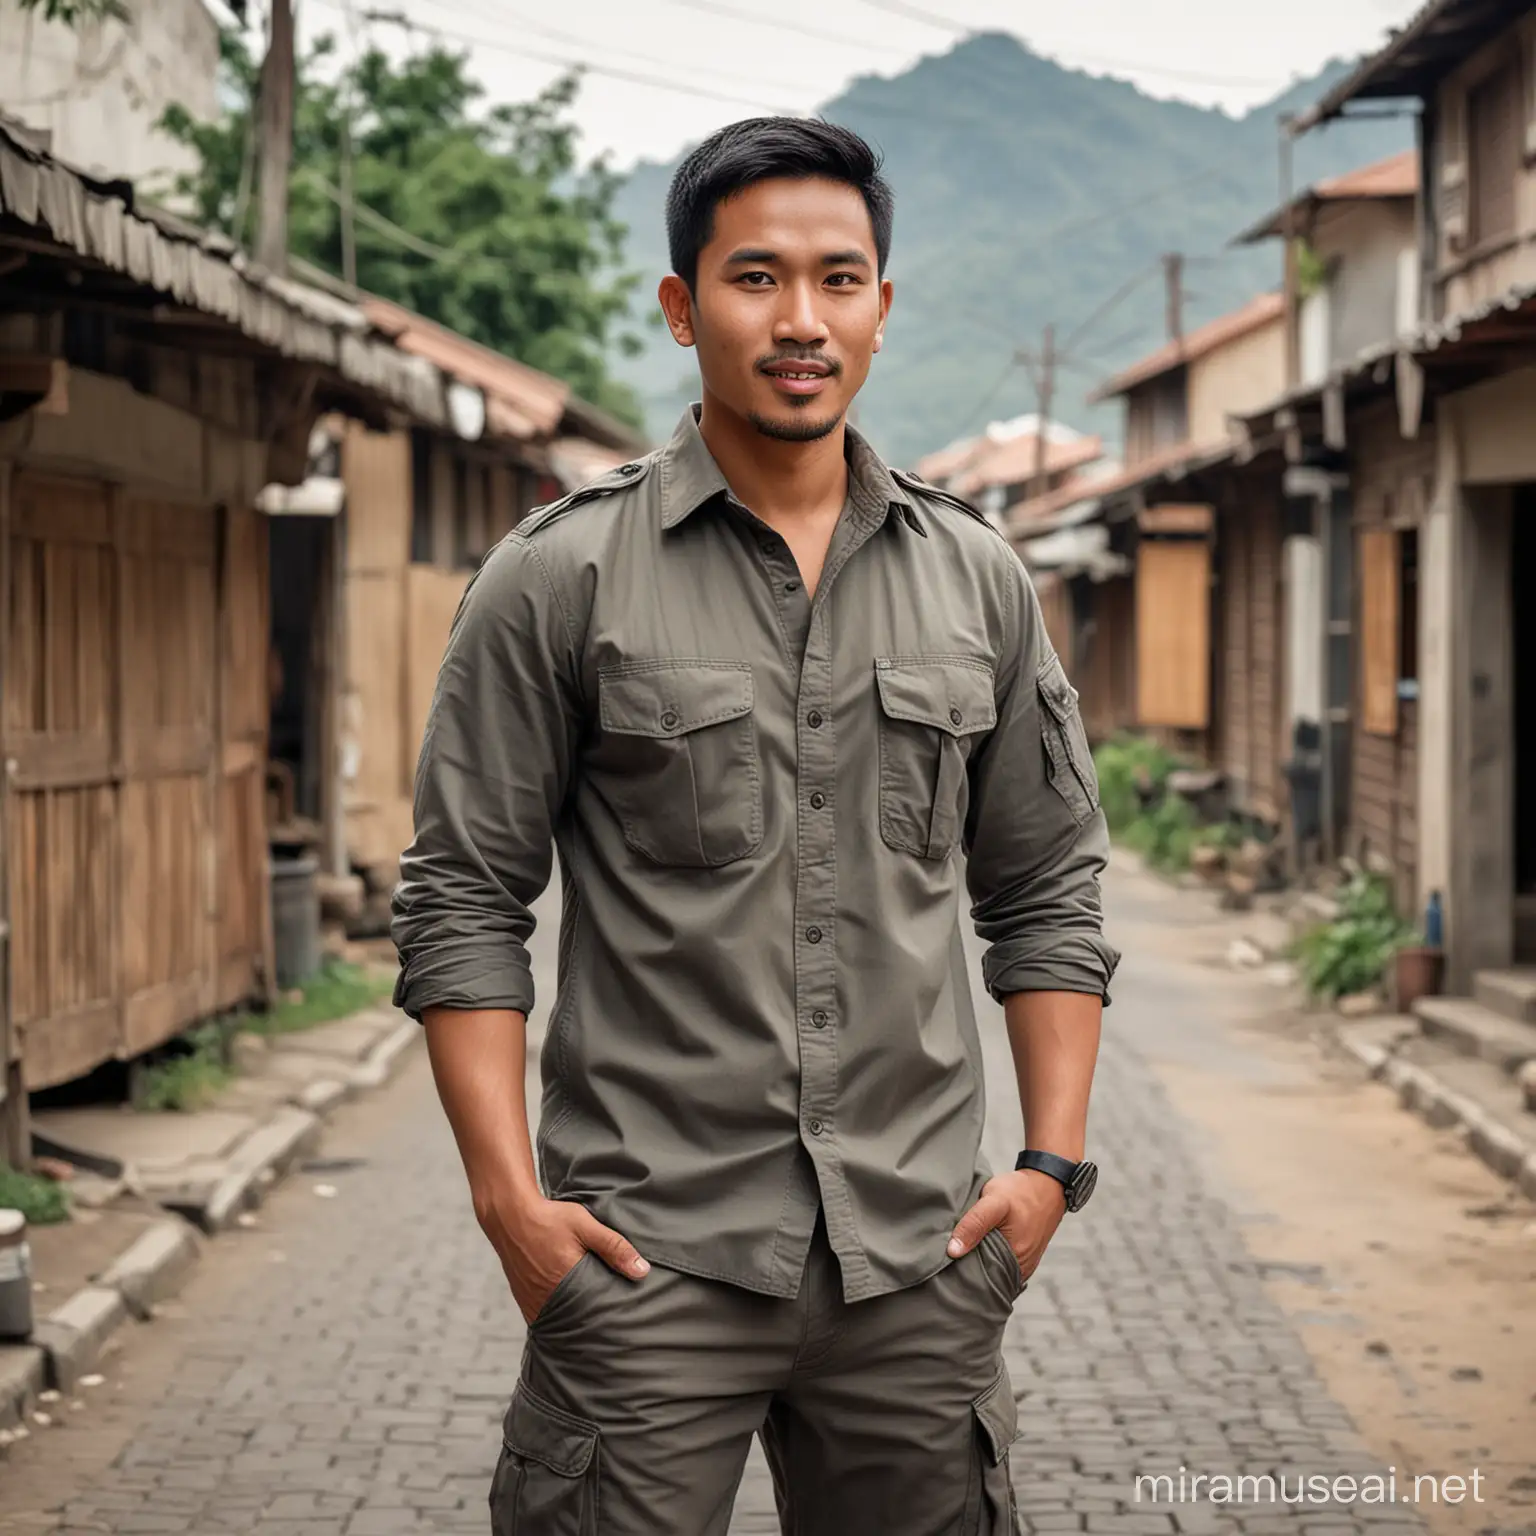 A handsome Indonesian man with a slightly chubby face, short black hair, and a thin beard, wearing a dark gray tactical shirt and brown tactical cargo pants, is standing smilingly in a cool village street. Background of a village. The picture looks very realistic and super detailed with a blurred background.